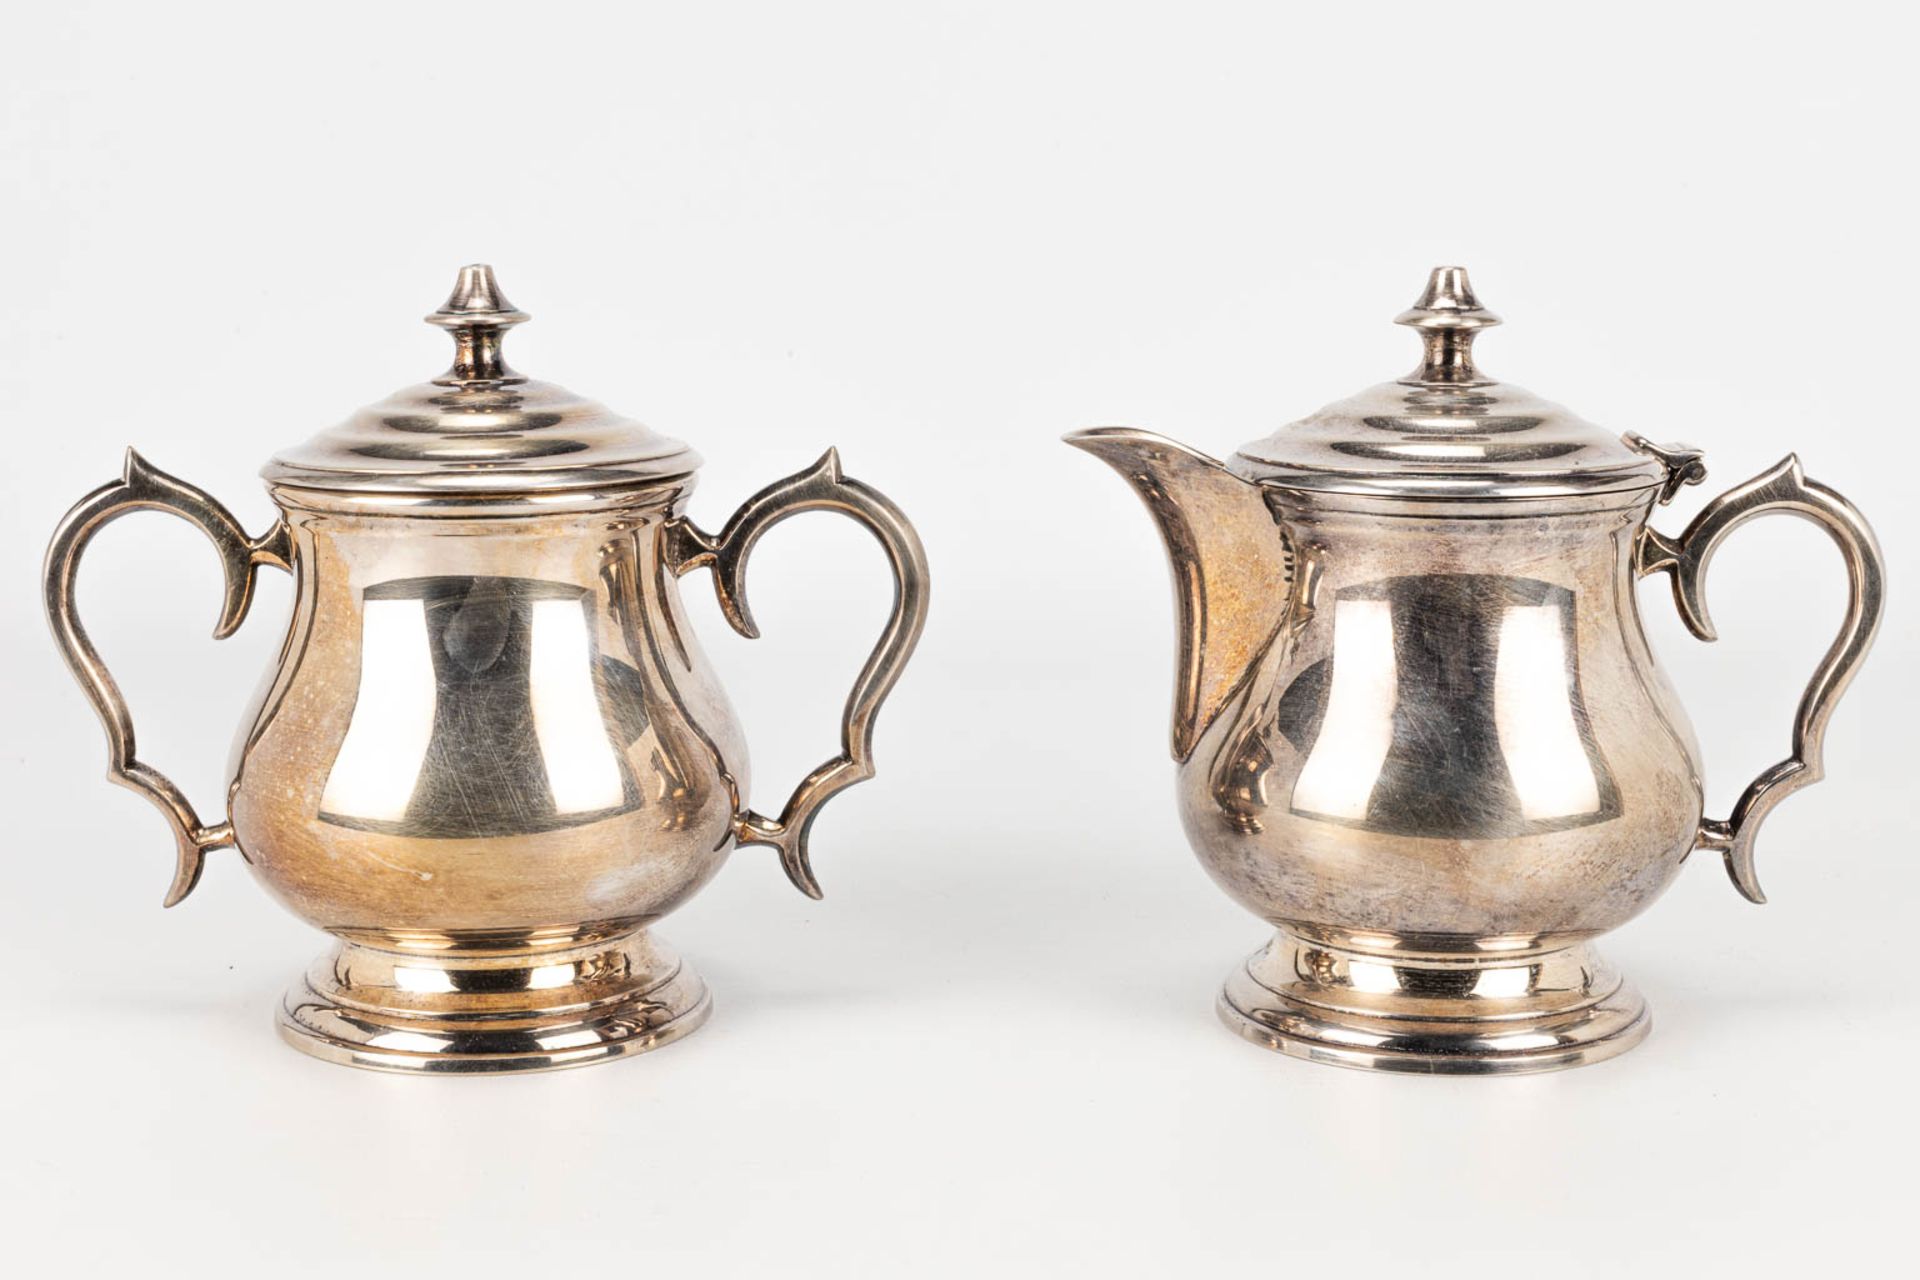 A coffee and tea service made of silver-plated metal. - Image 11 of 15